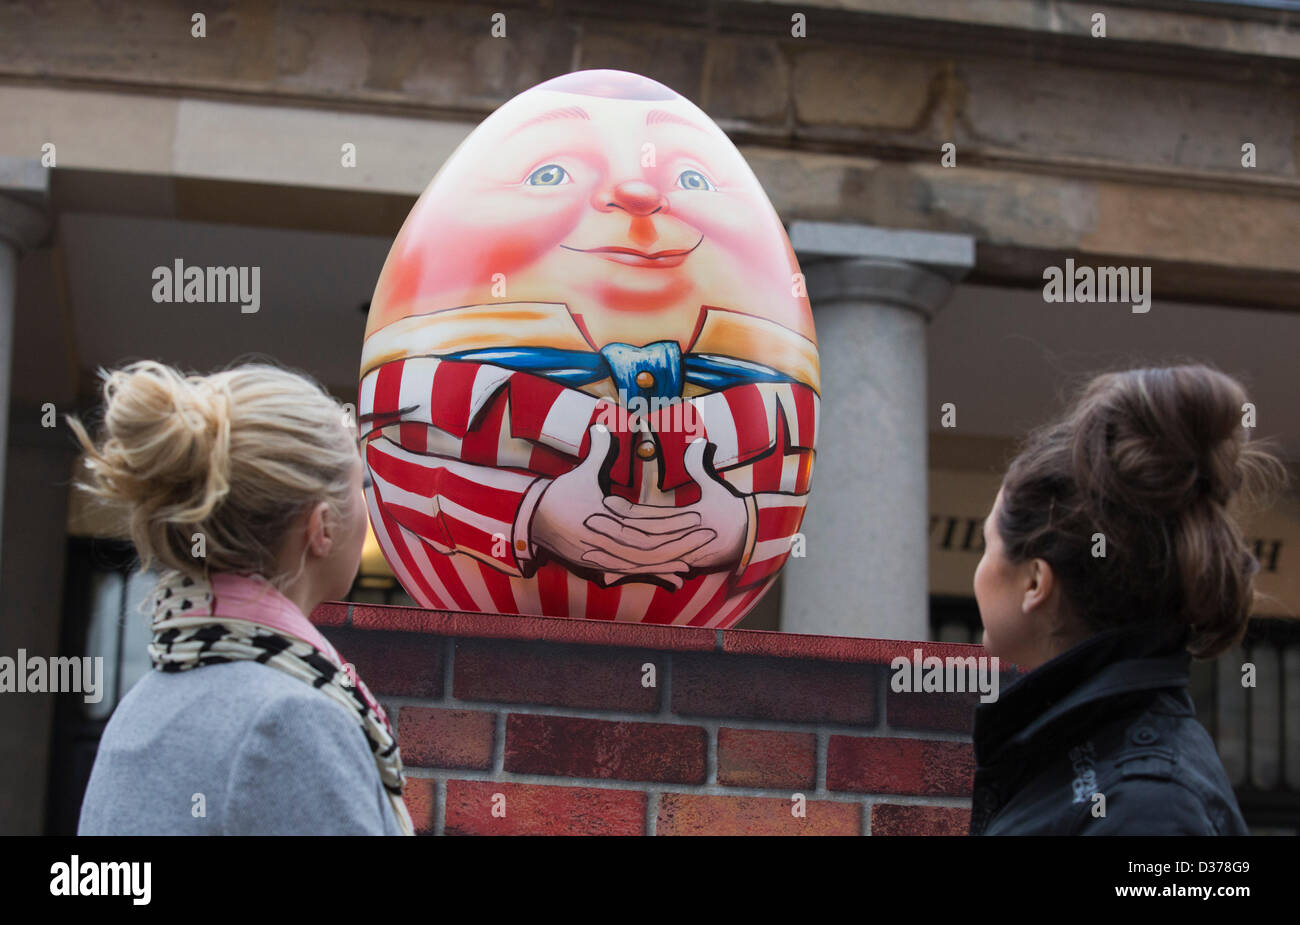 London, UK. 12th February 2013.  Veronica Fulton, 21, and Imogen Money, 22, from London admire the eggs. Over 100 giant Easter eggs designed by artists and designers were unveiled today in Covent Garden Piazza, London, to launch The Lindt Big Egg Hunt in support for the charity 'Action for Children'. For six weeks, from 12 February to 1 April 2013, giant Easter eggs will tour the country, from London's Covent Garden to Birmingham, Liverpool, Manchester, Glasgow and back to London in time for Easter. Photo: Nick Savage/Alamy Live News Stock Photo